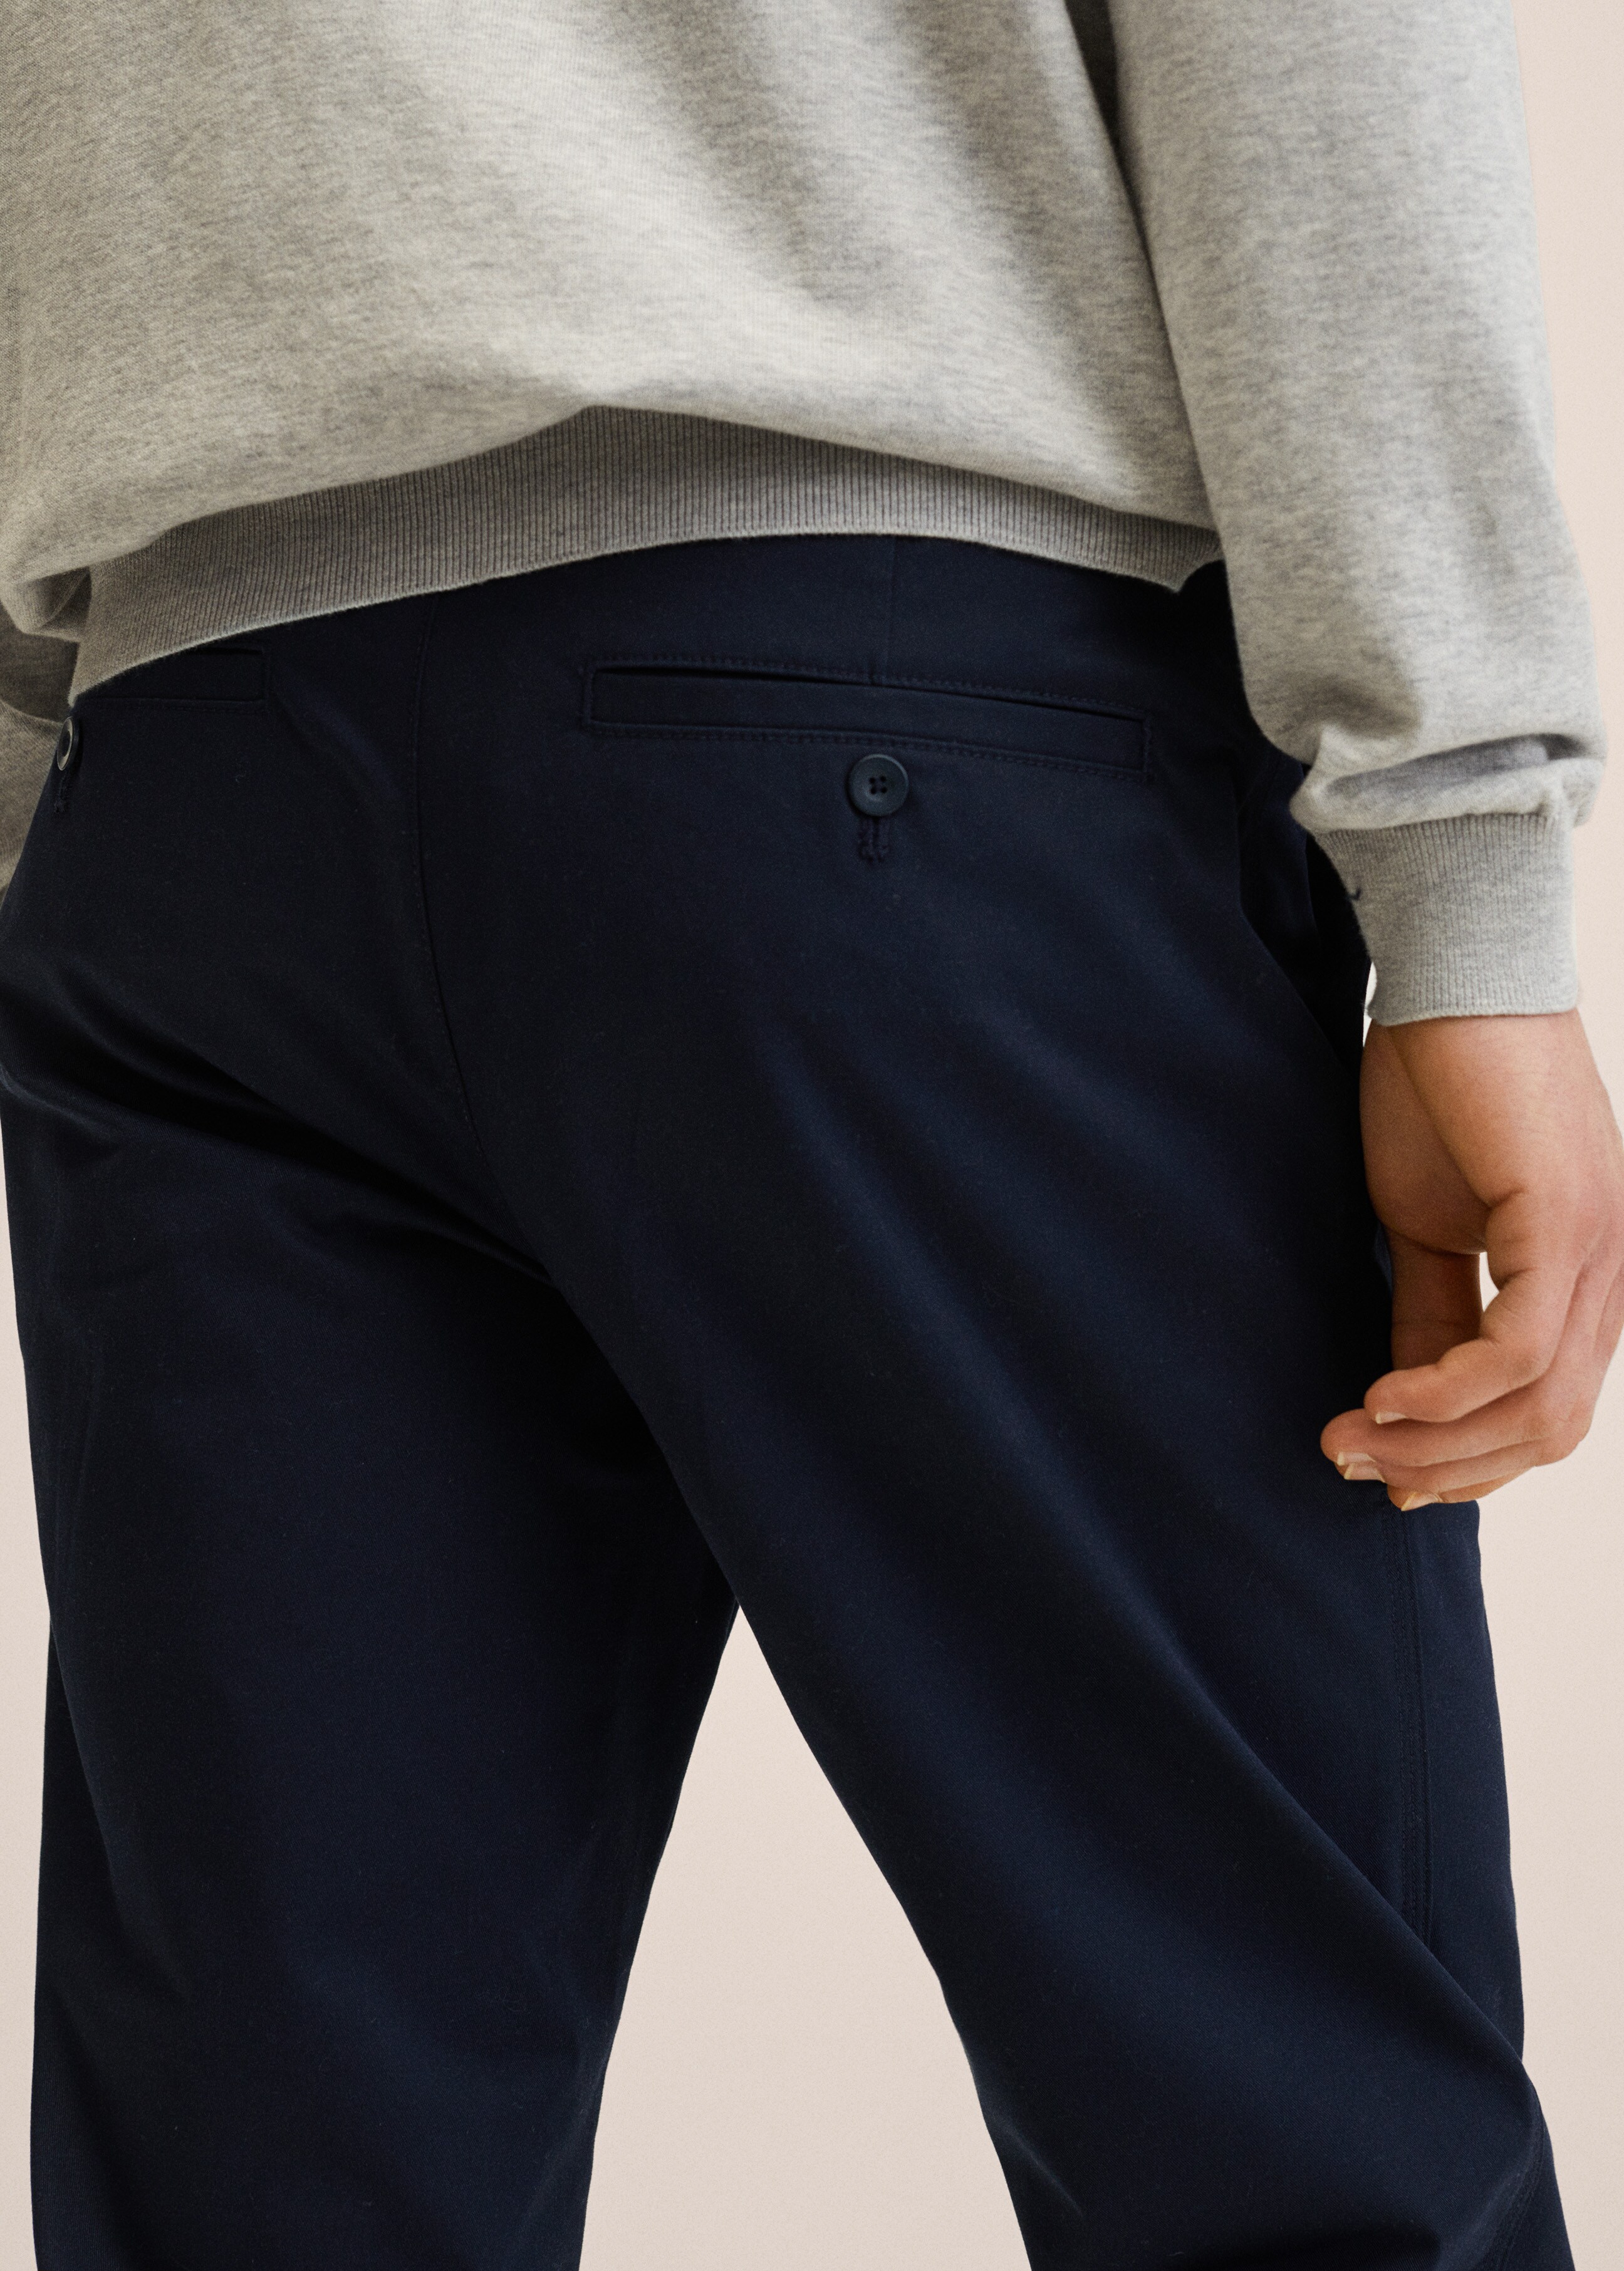 Cotton chinos - Details of the article 3